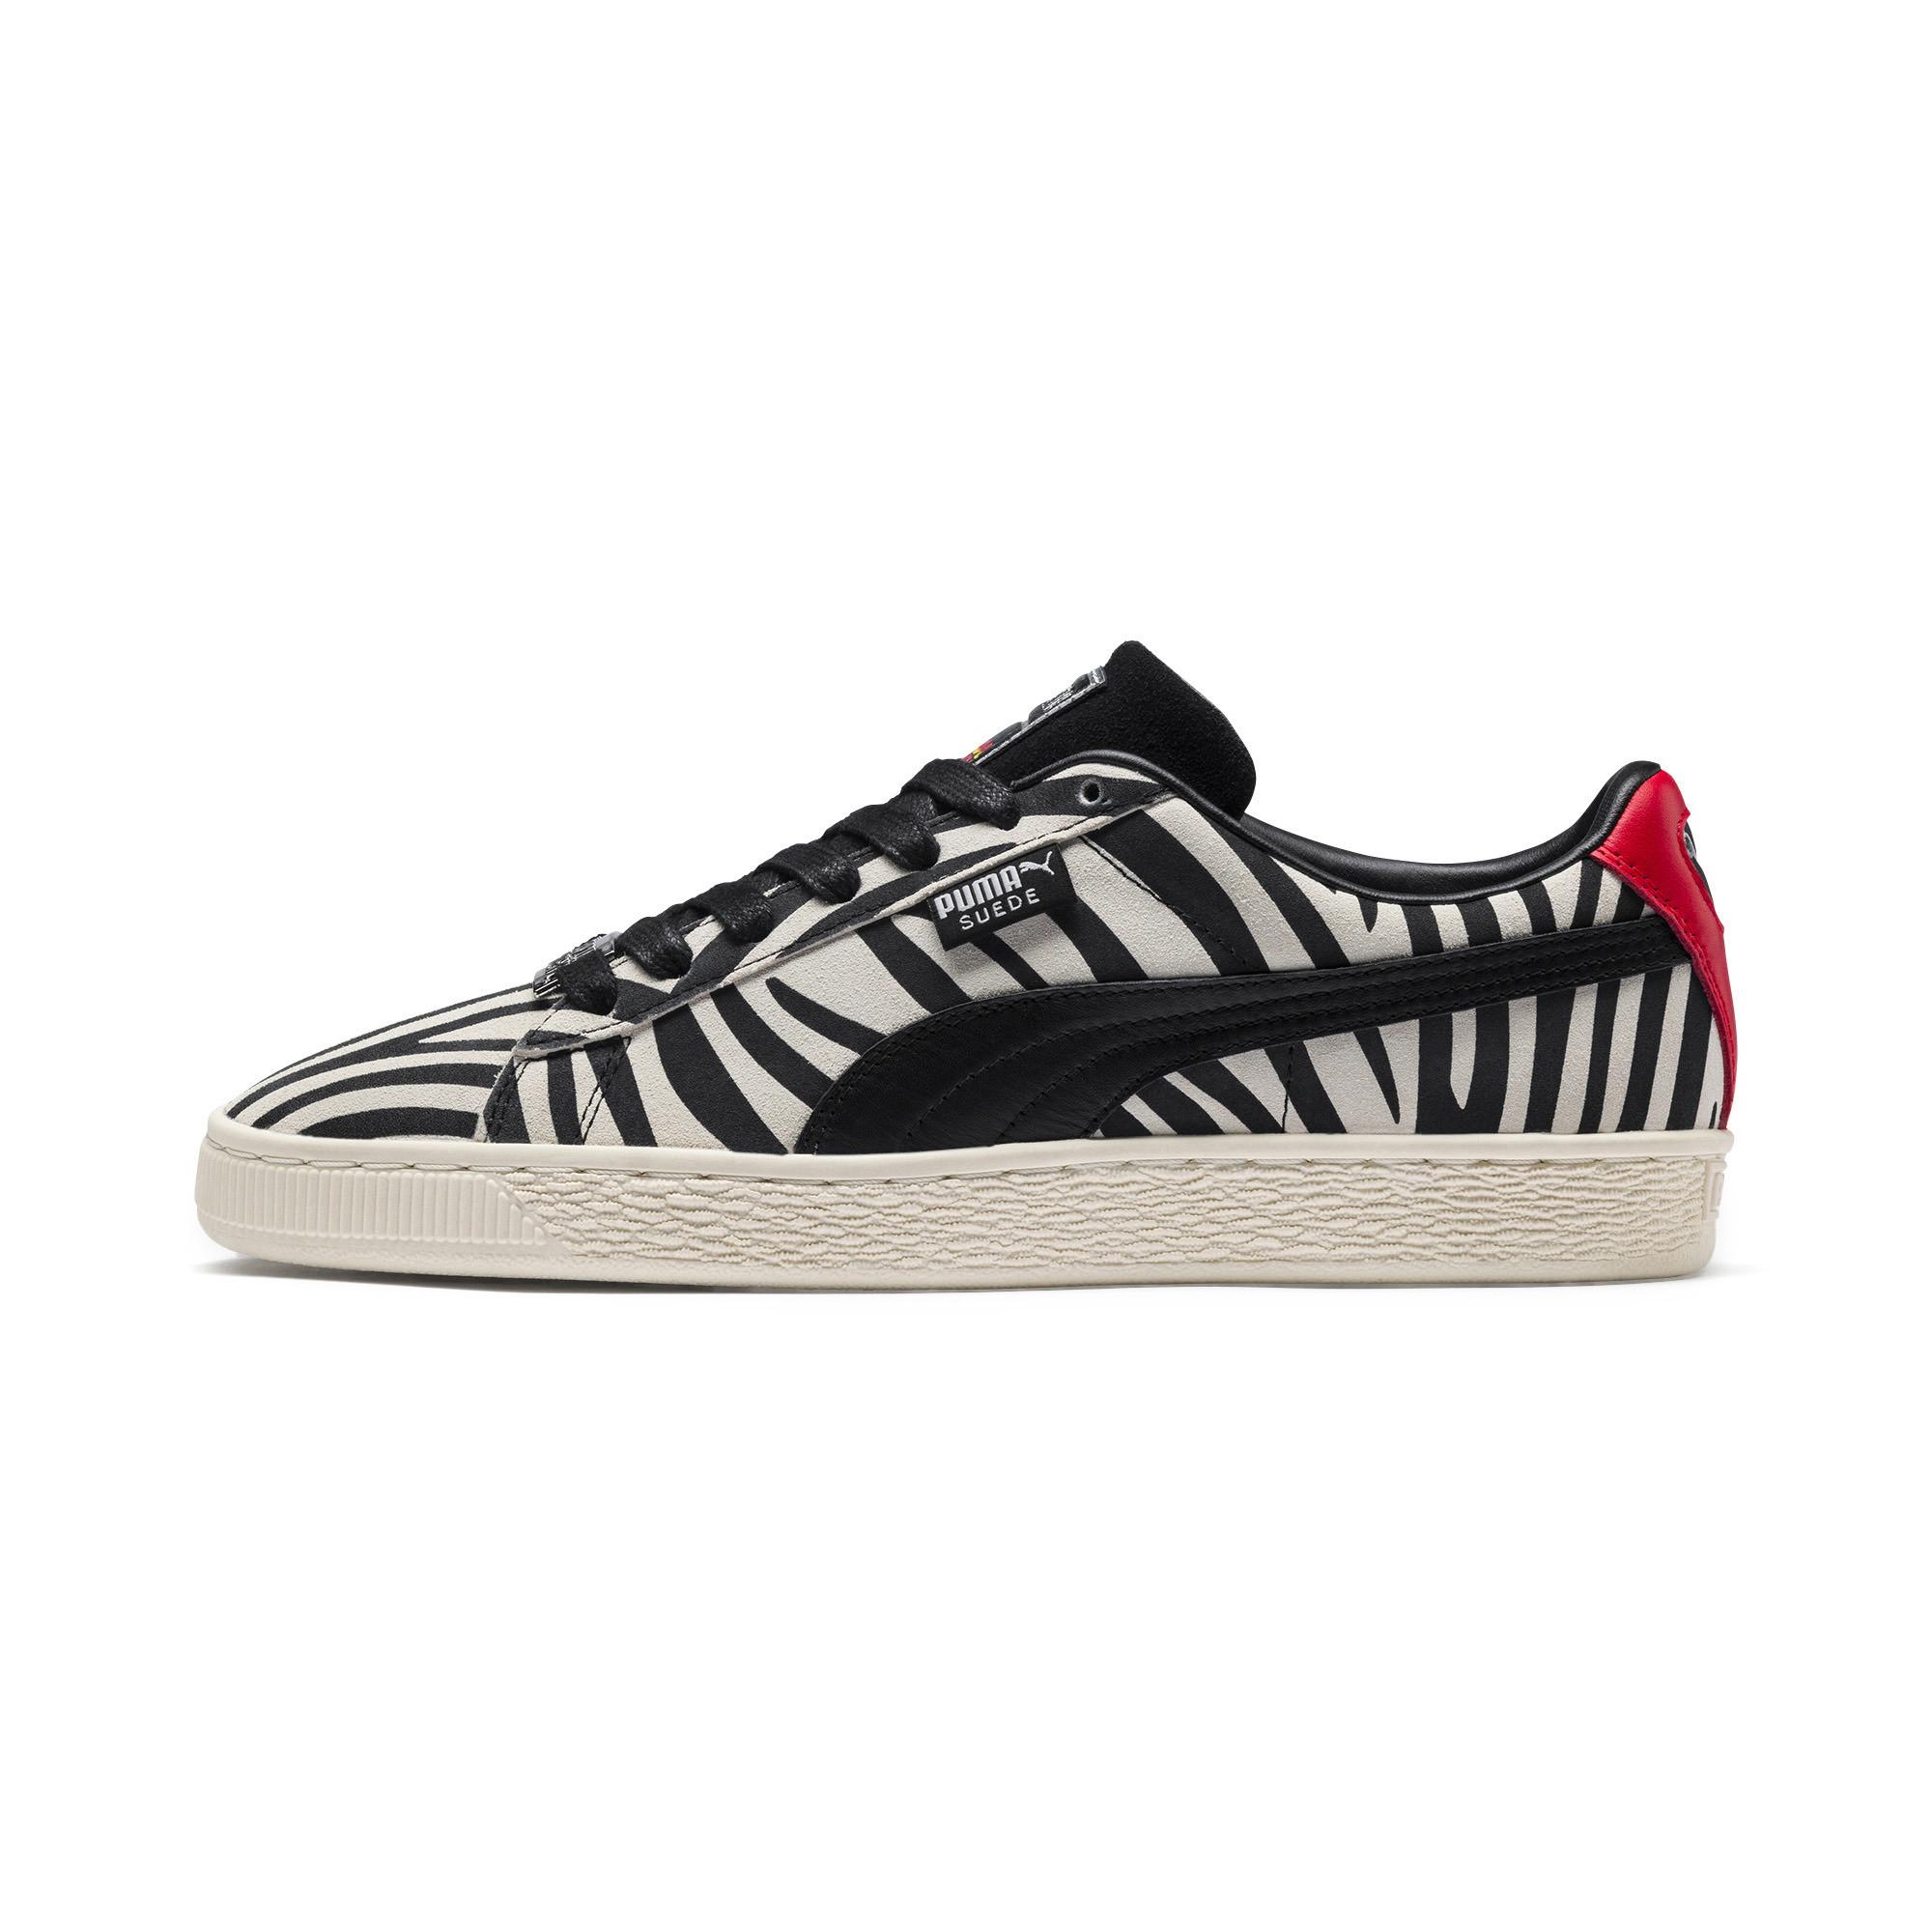 PUMA X Paul Stanley Suede Shoes in White/Black (Black) for Men - Lyst